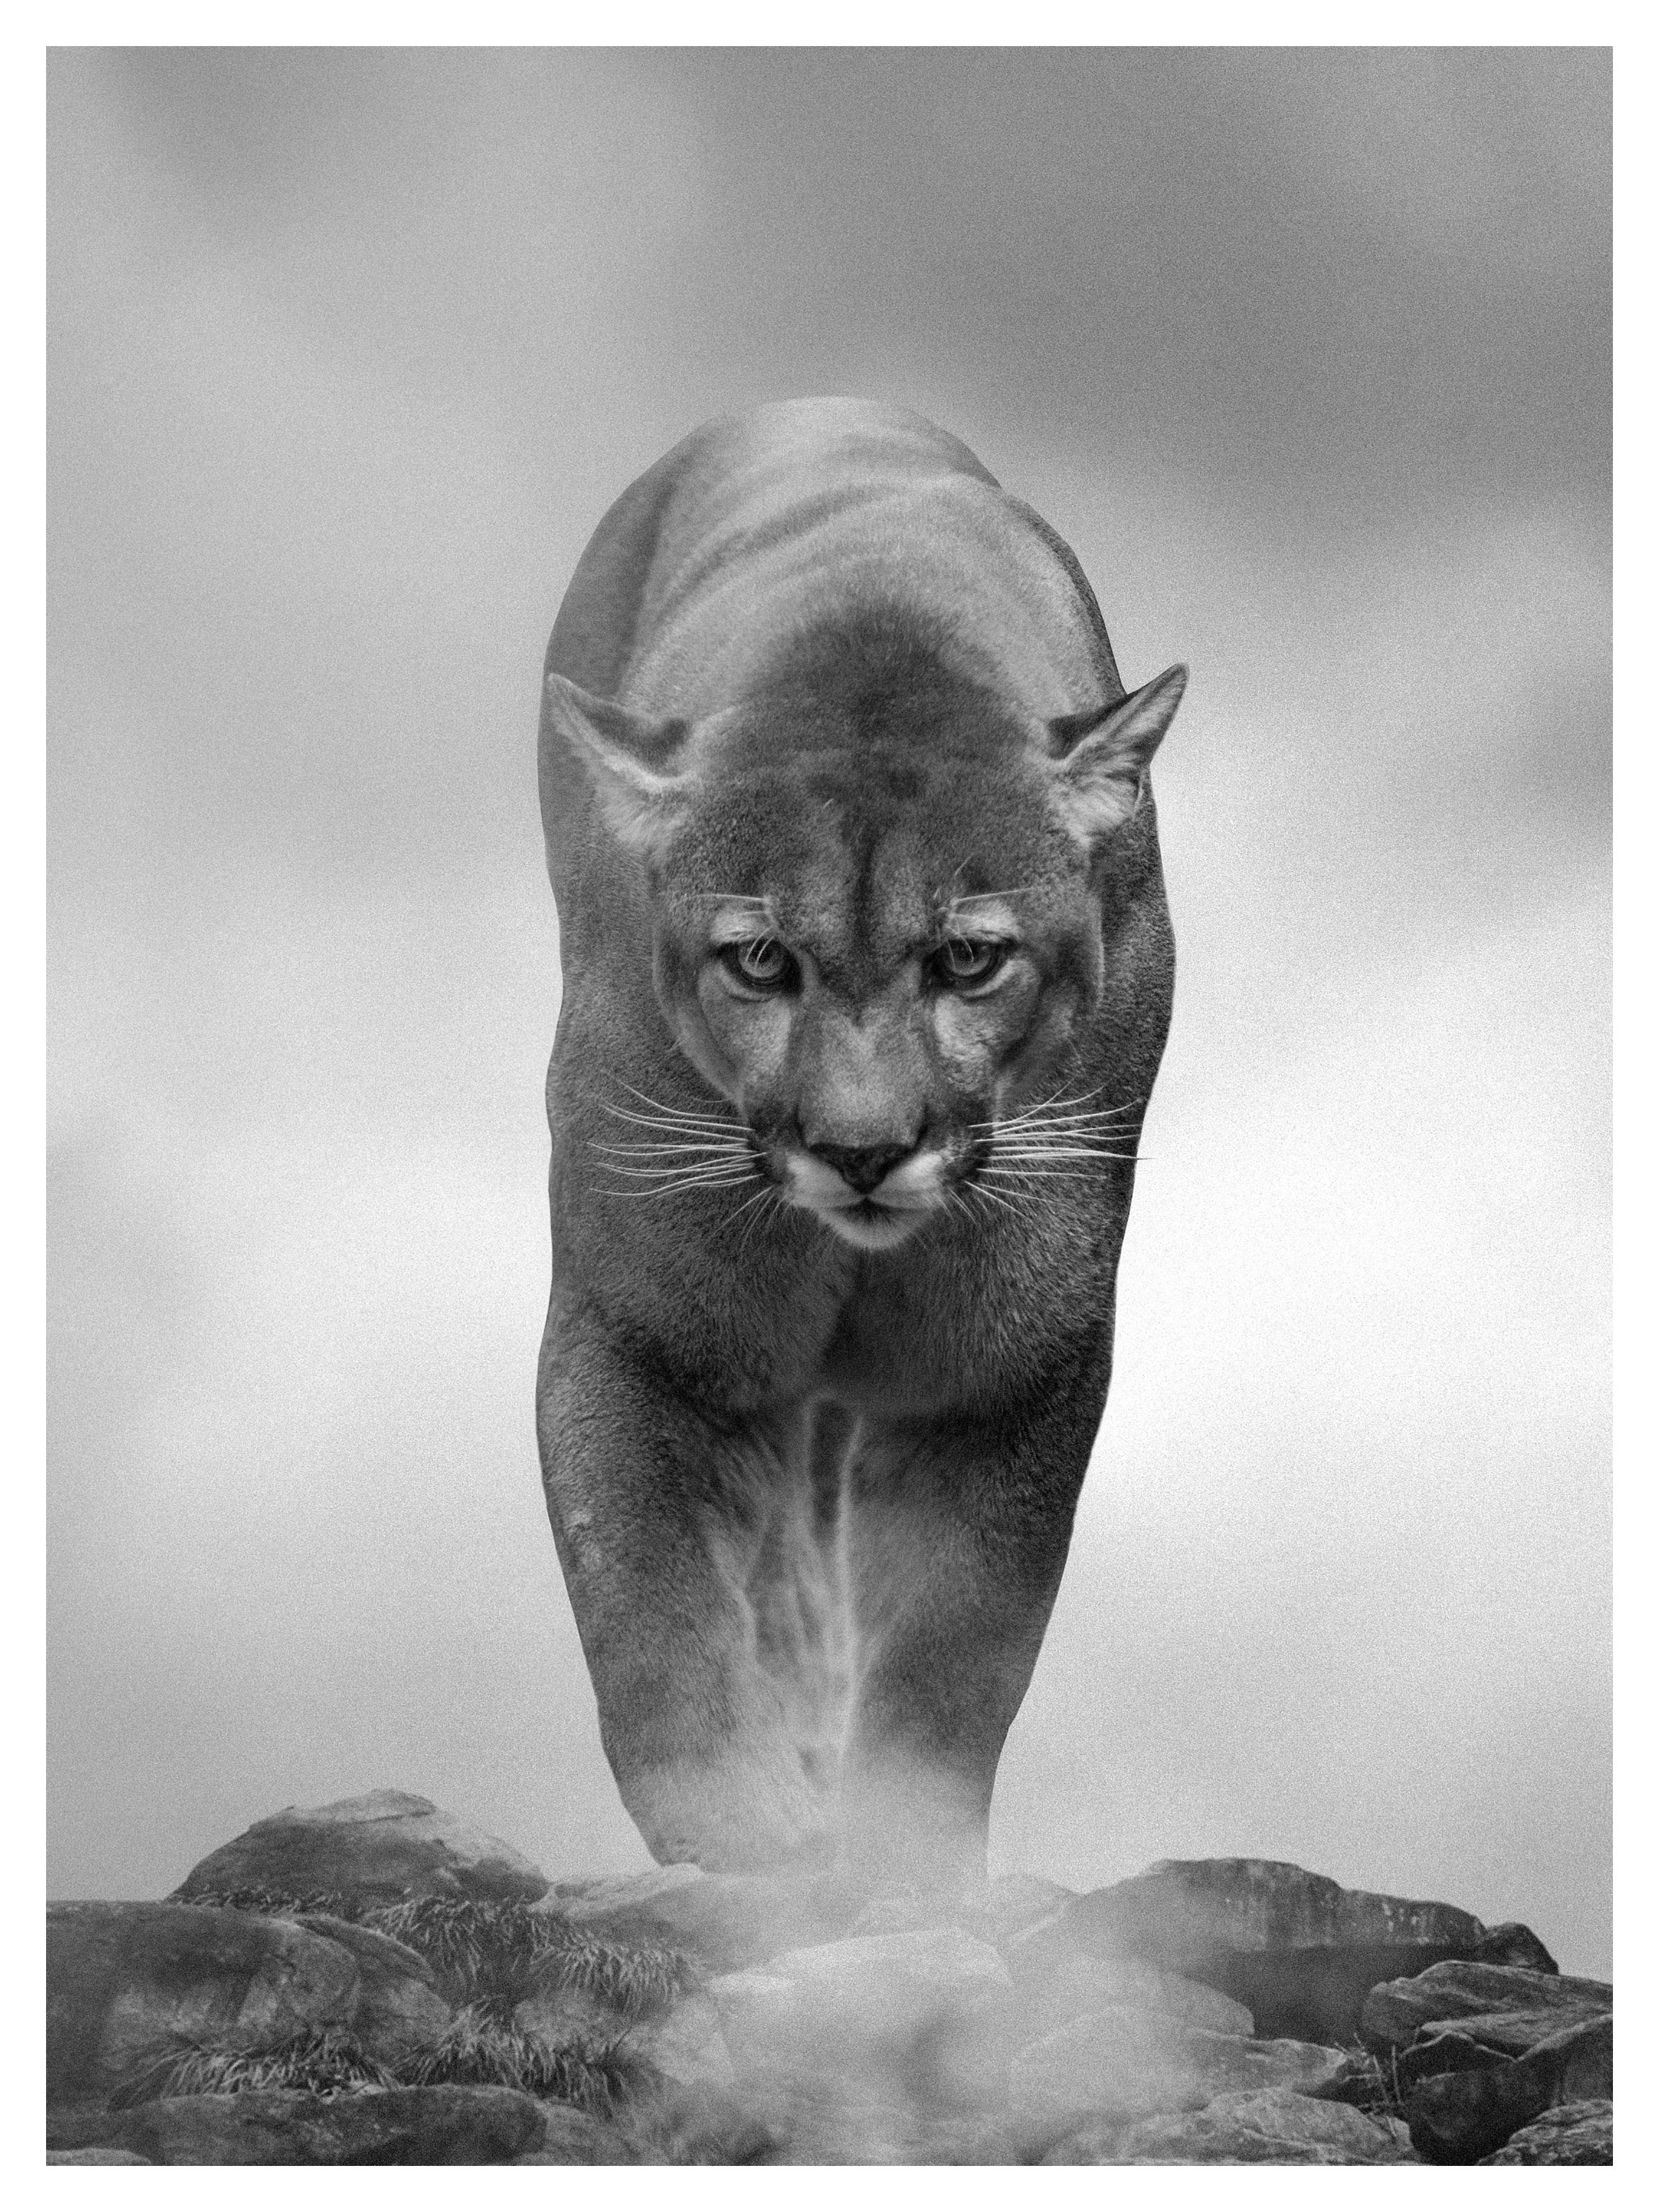 Shane Russeck Animal Print - 60x40 "King of the Mountain"  Black & White Photography, Cougar, Mountain Lion